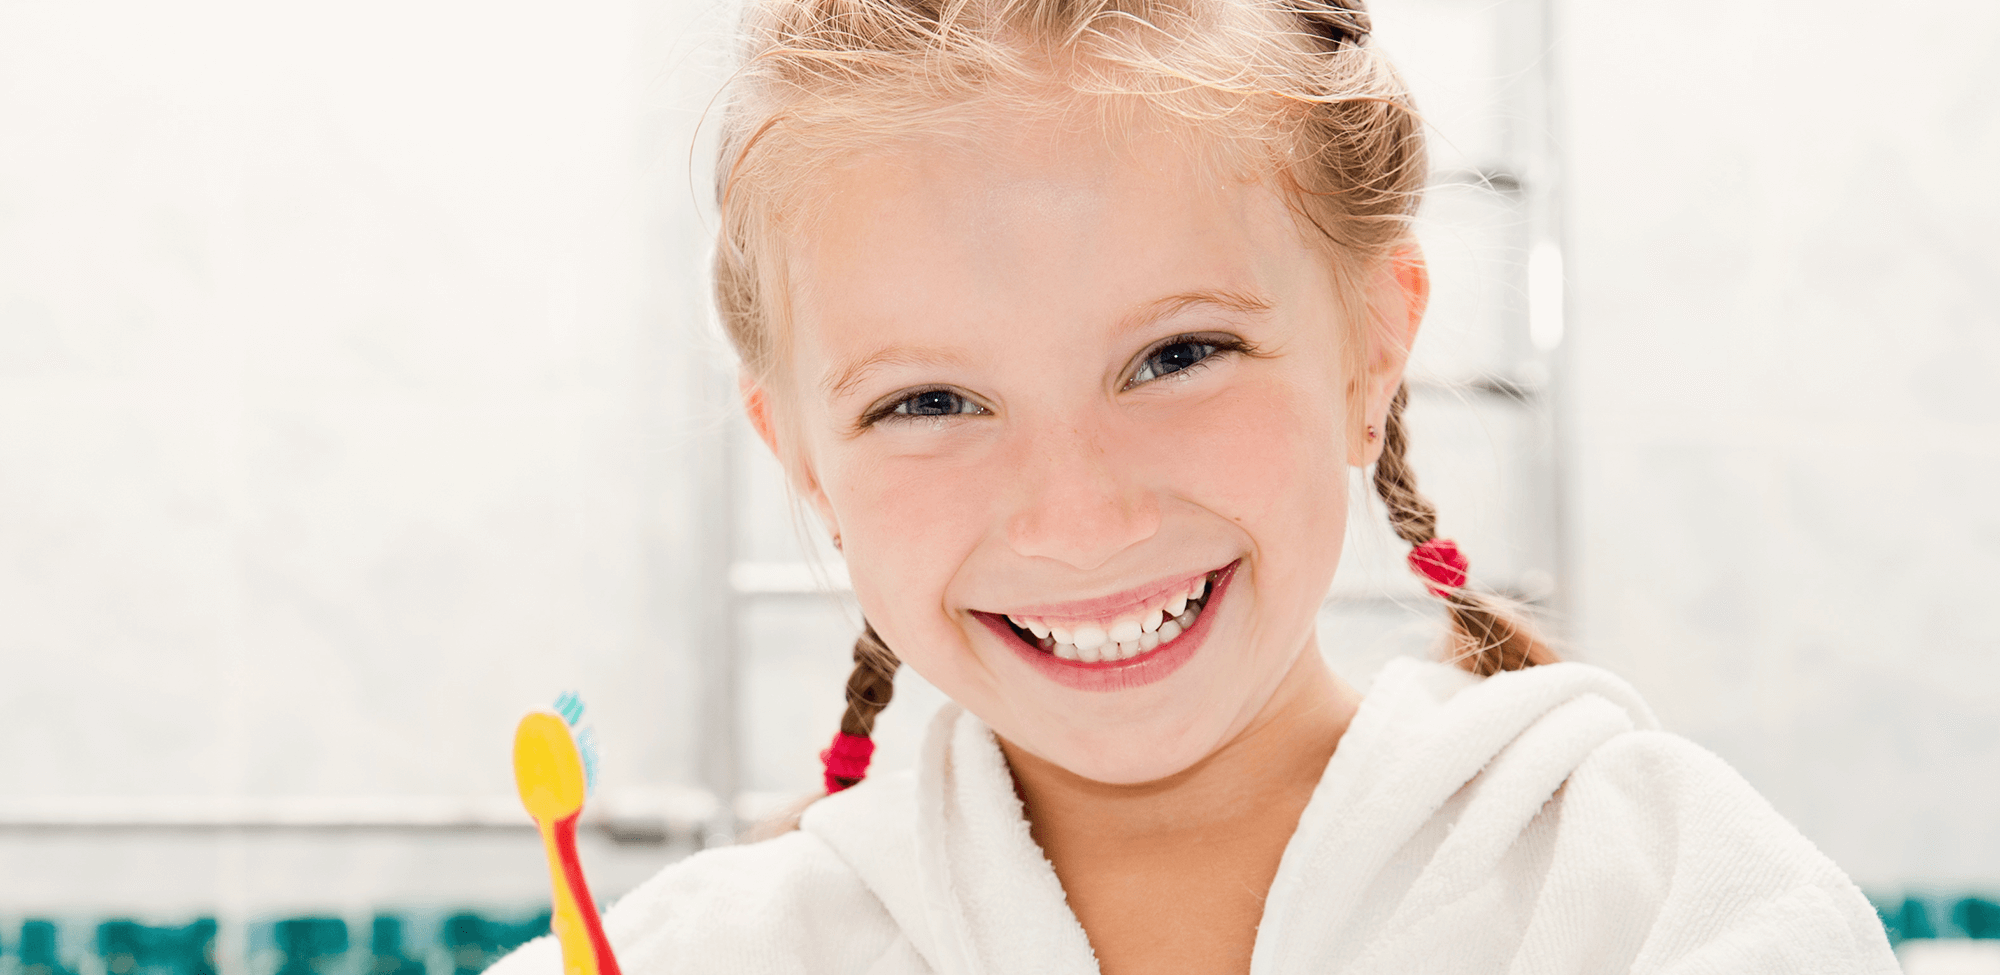 young child smiling holding toothbrush